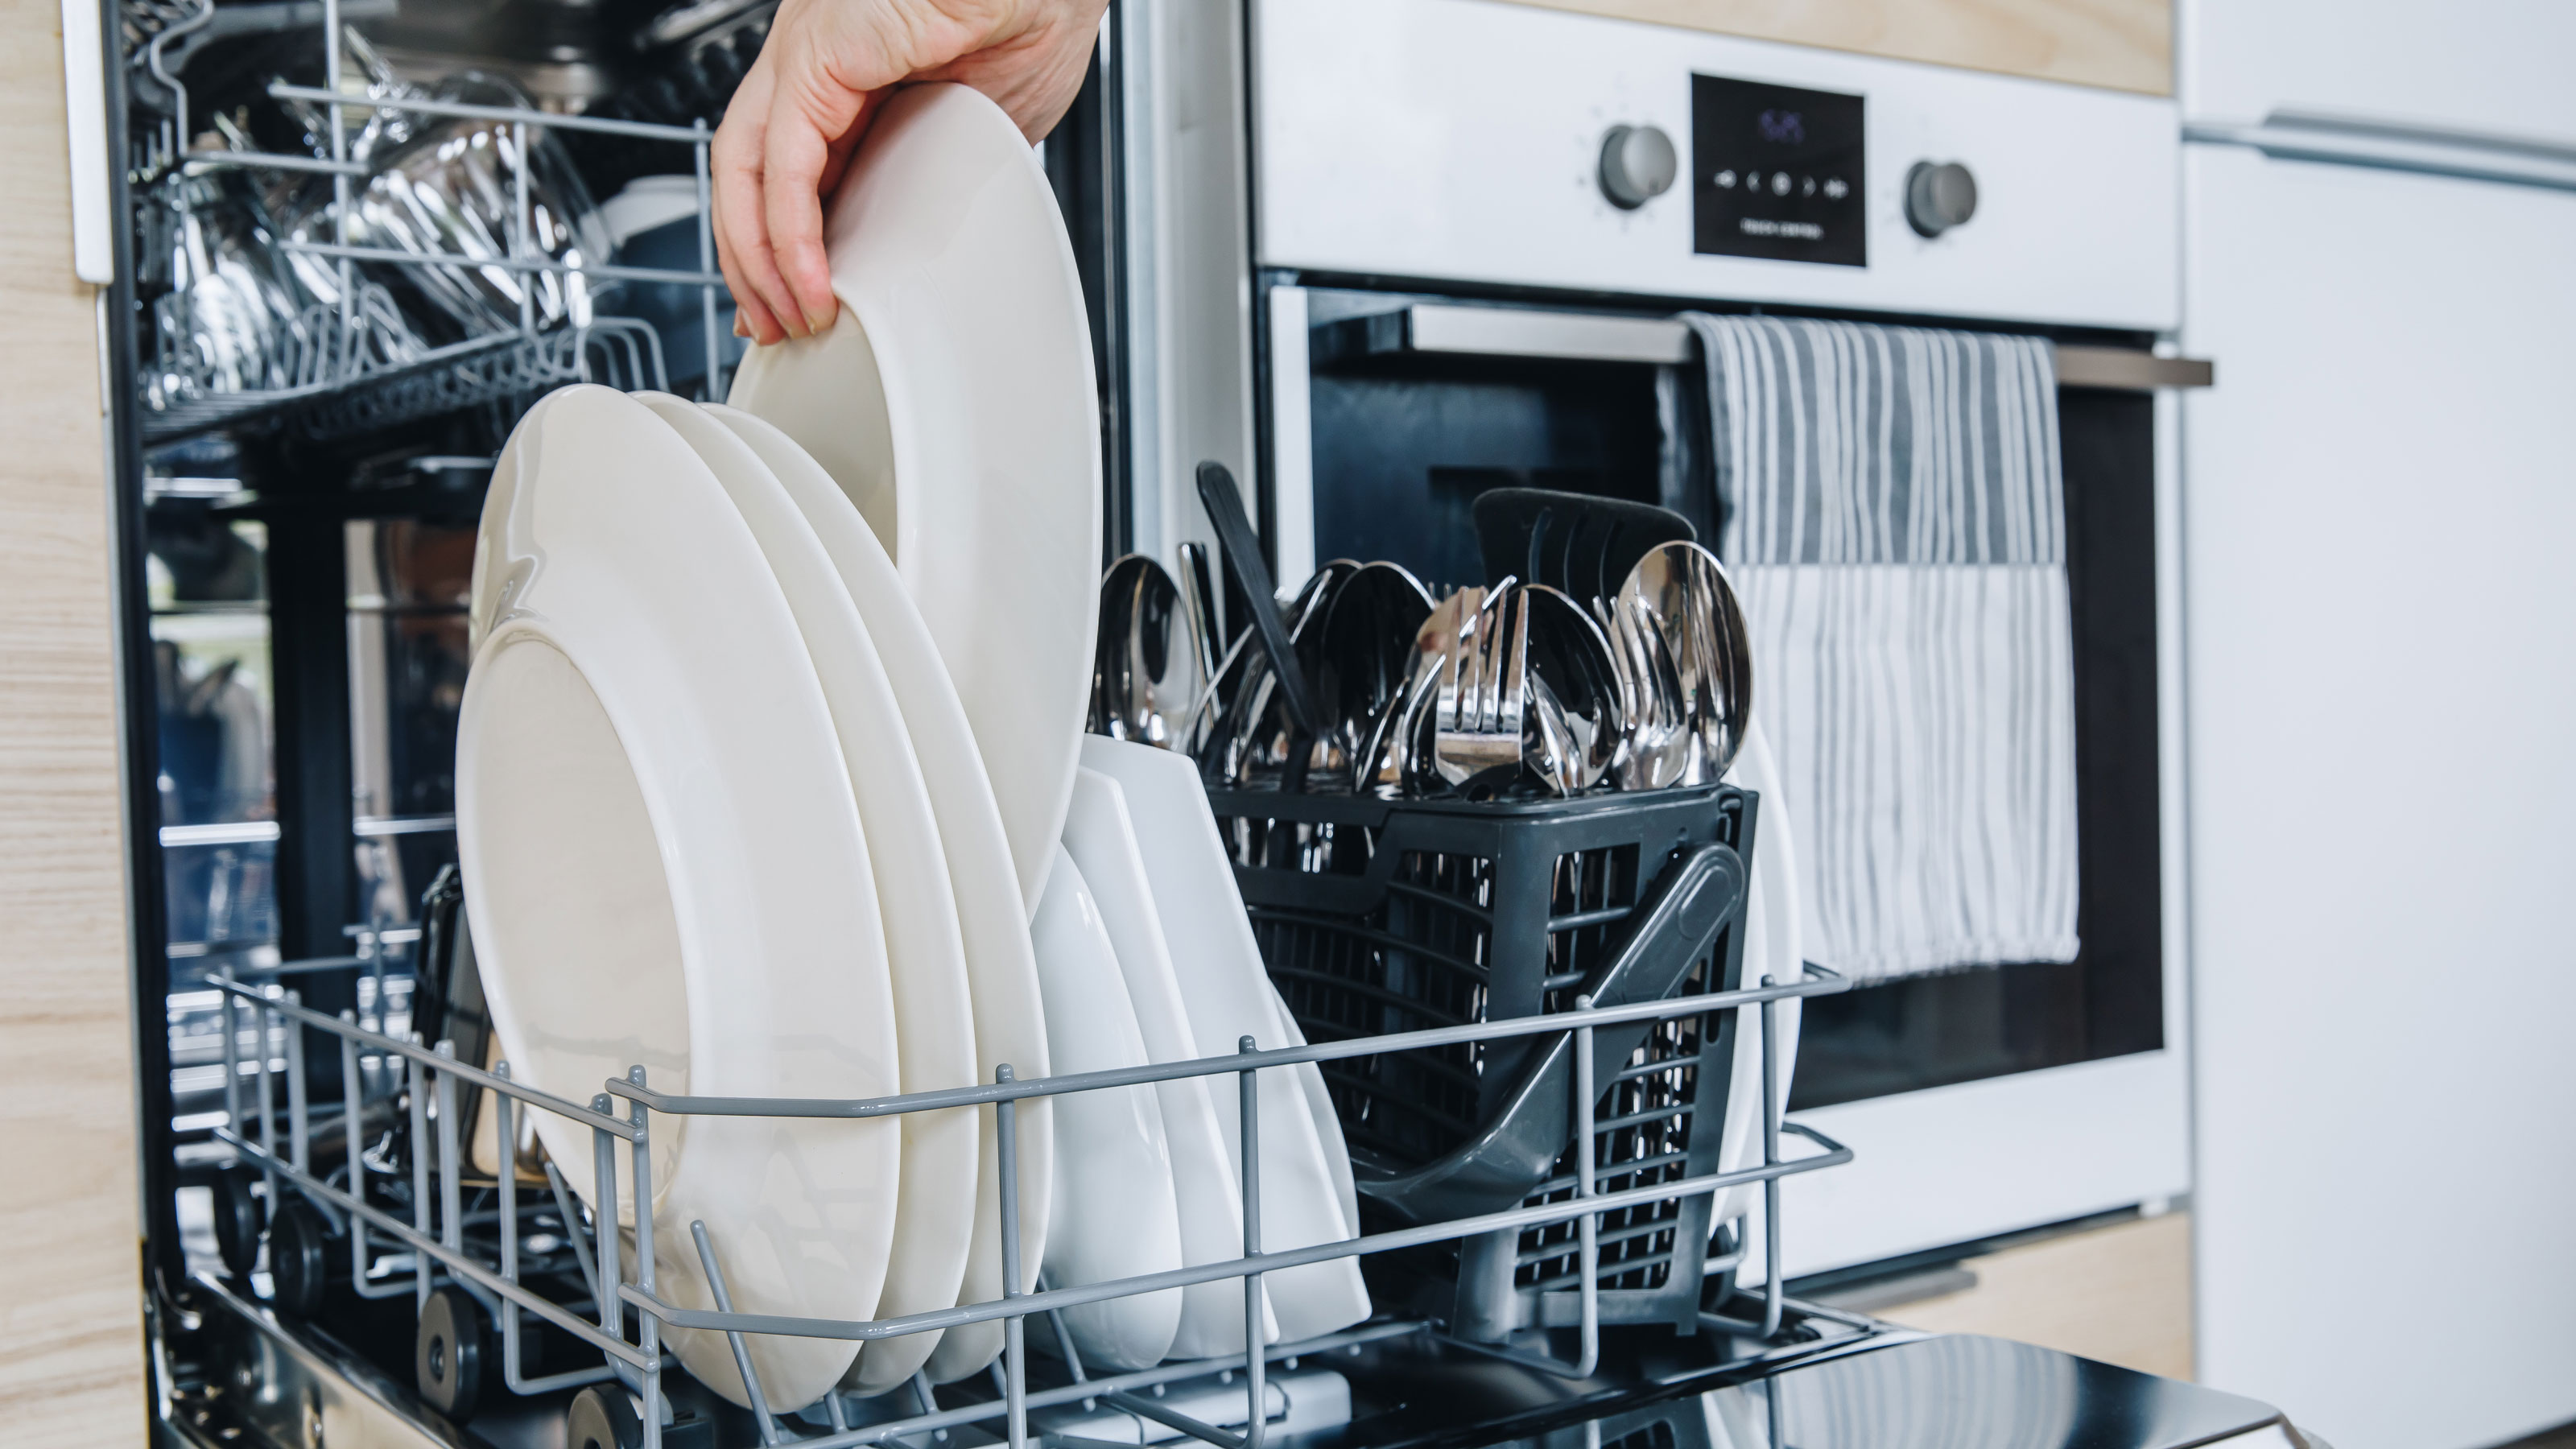 Dishwasher not drying? Here are 8 reasons why